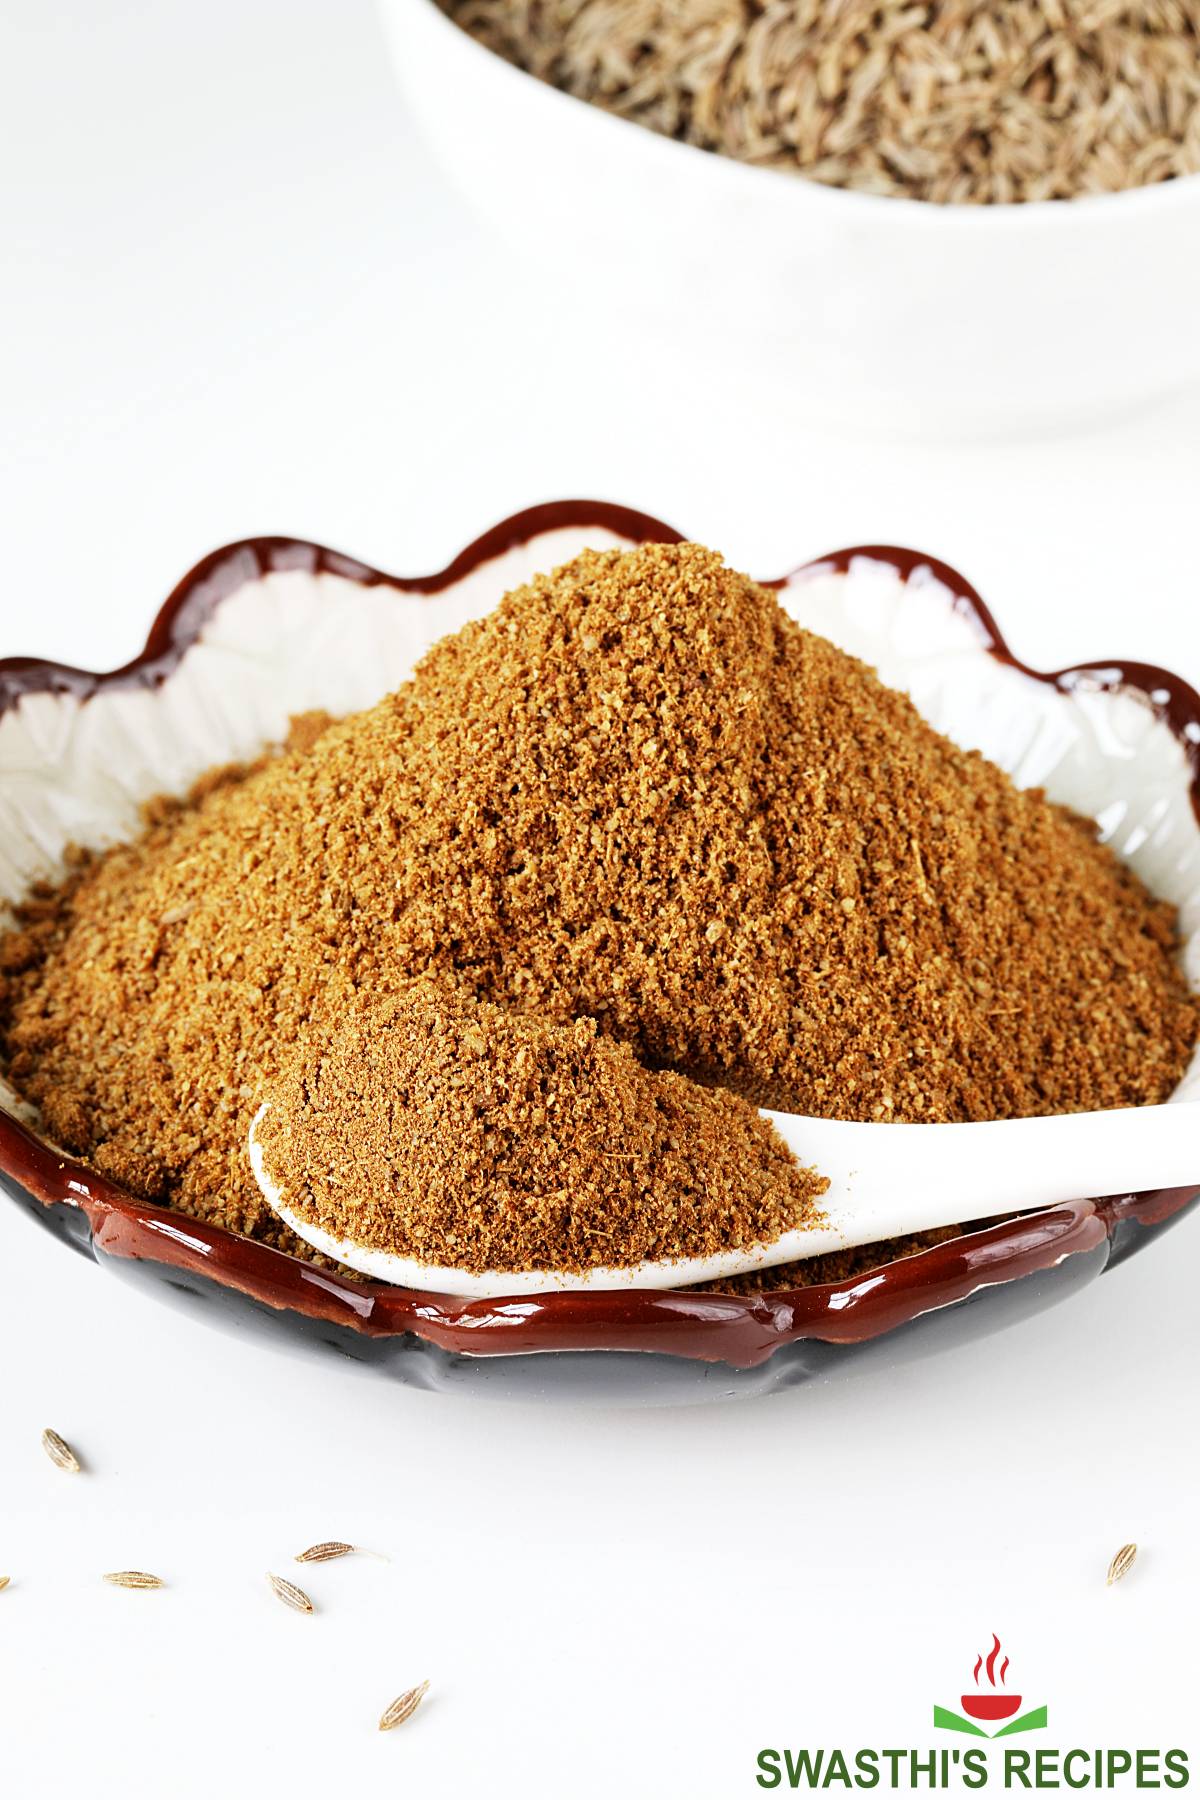 Cumin powder is ground cumin made from whole seeds